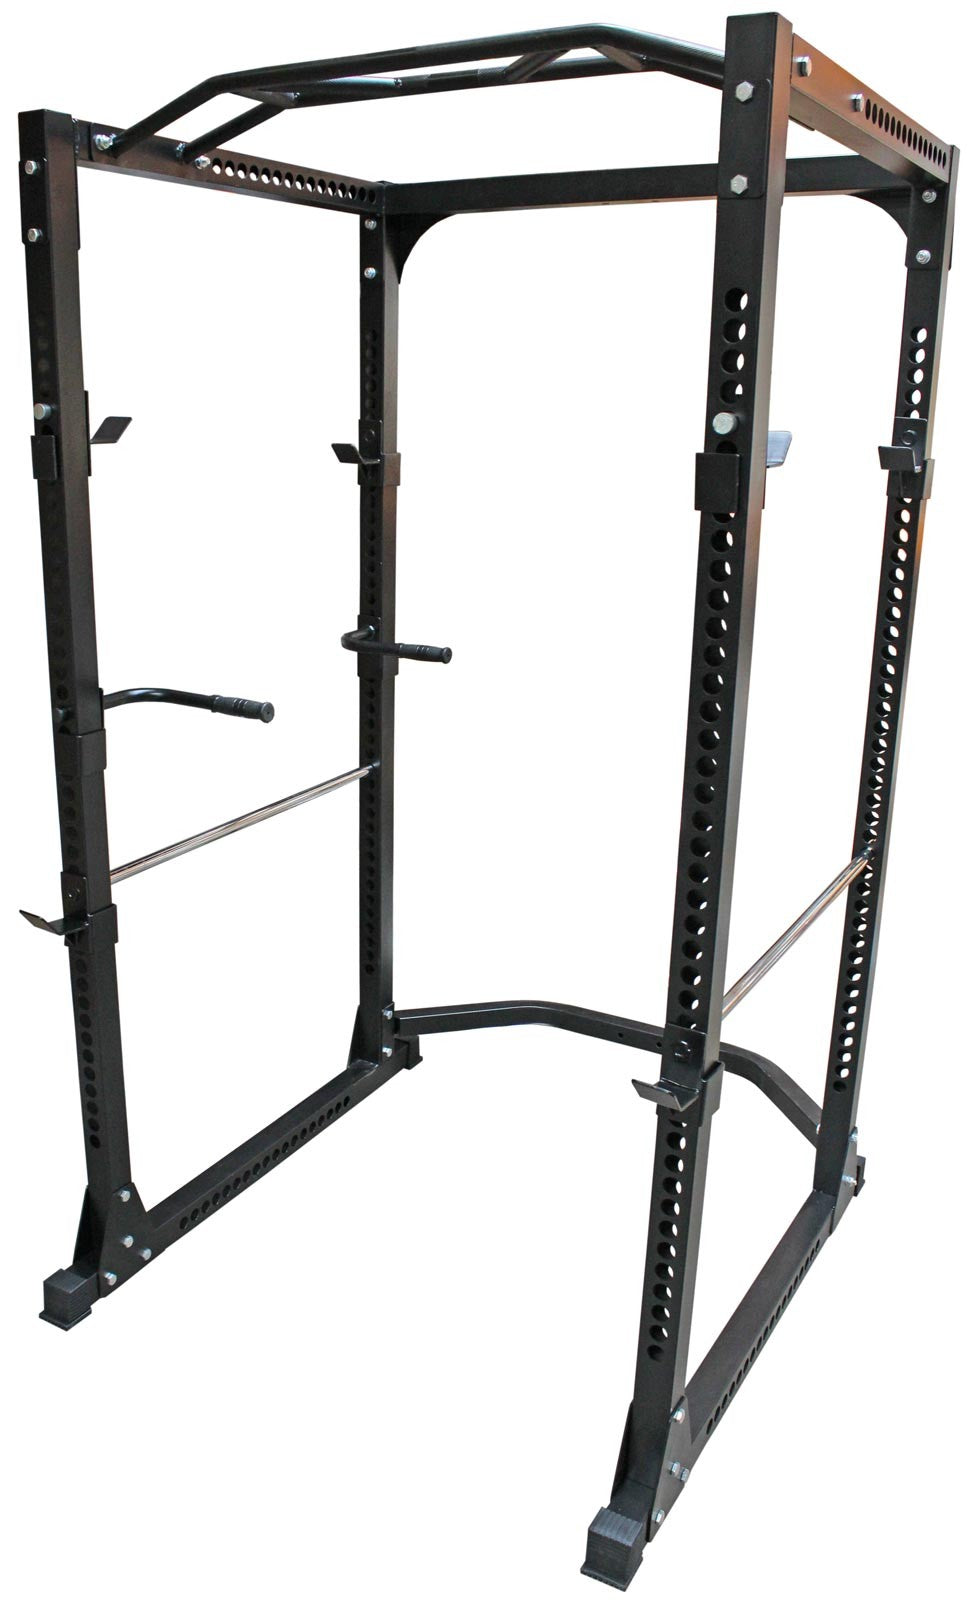 H-0076 Power Cage with attachment - iworkout.com.au